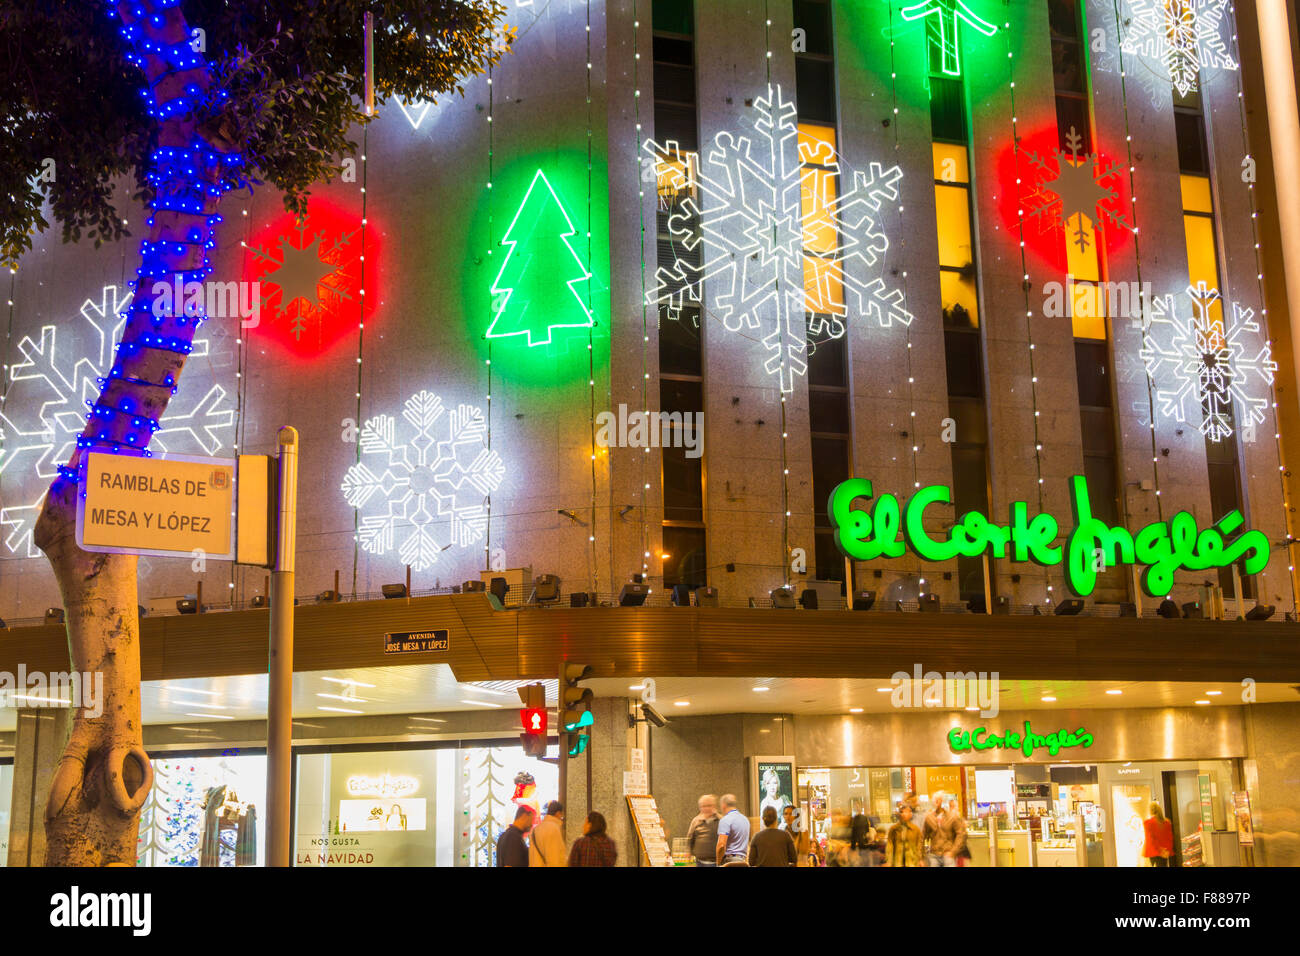 El Corte Ingles Gran Canaria High Resolution Stock Photography and Images -  Alamy